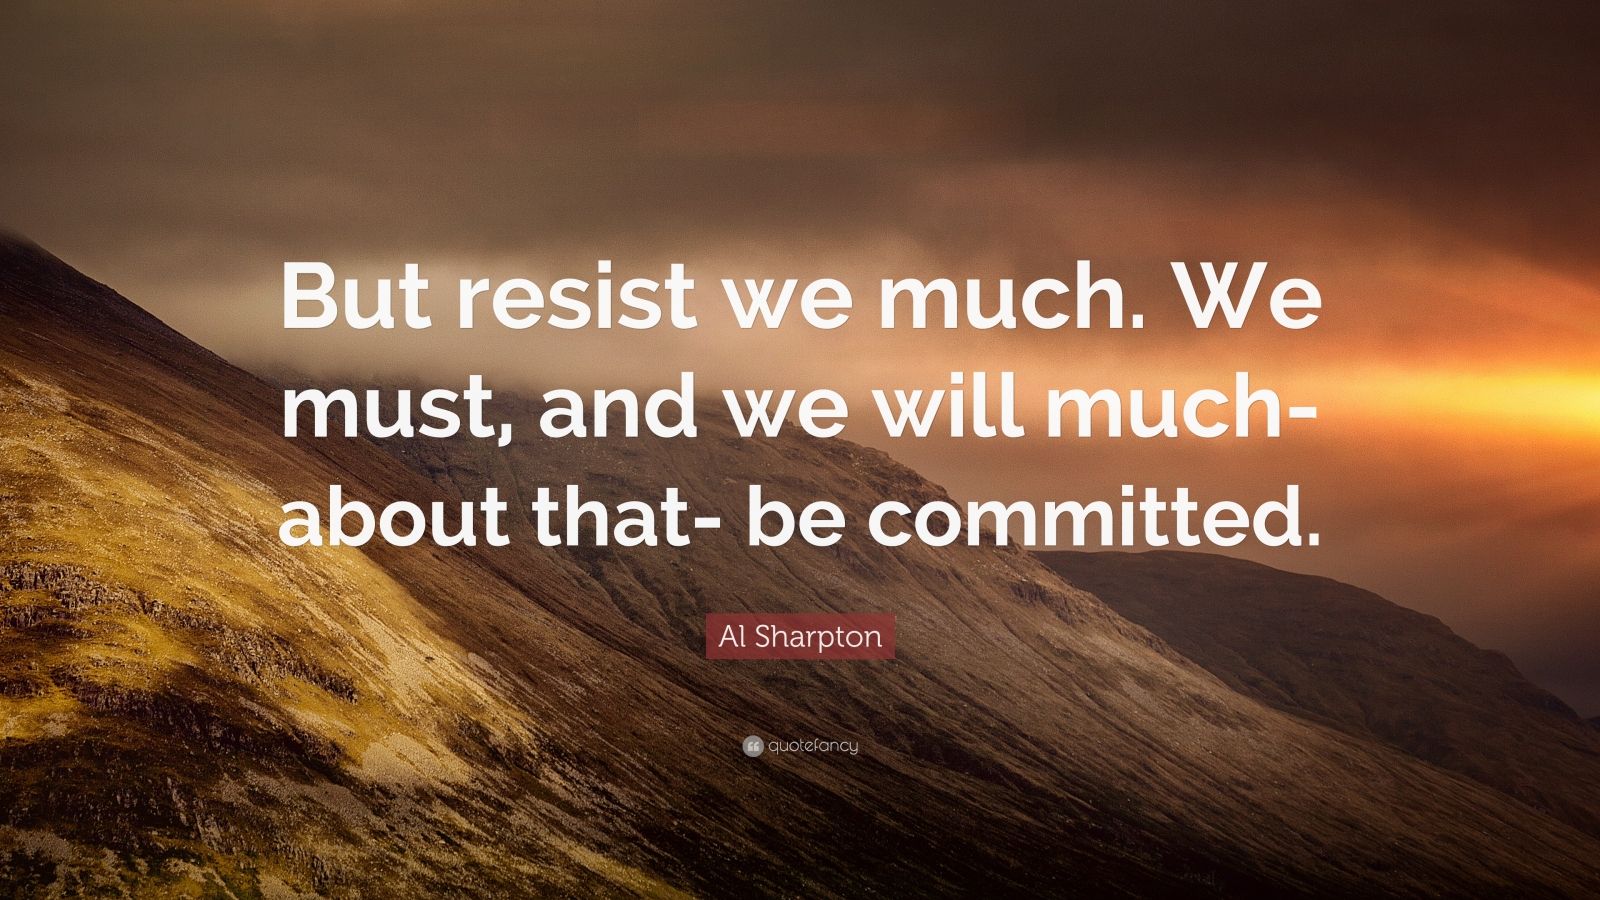 Al Sharpton Quote: “But resist we much. We must, and we will much ...